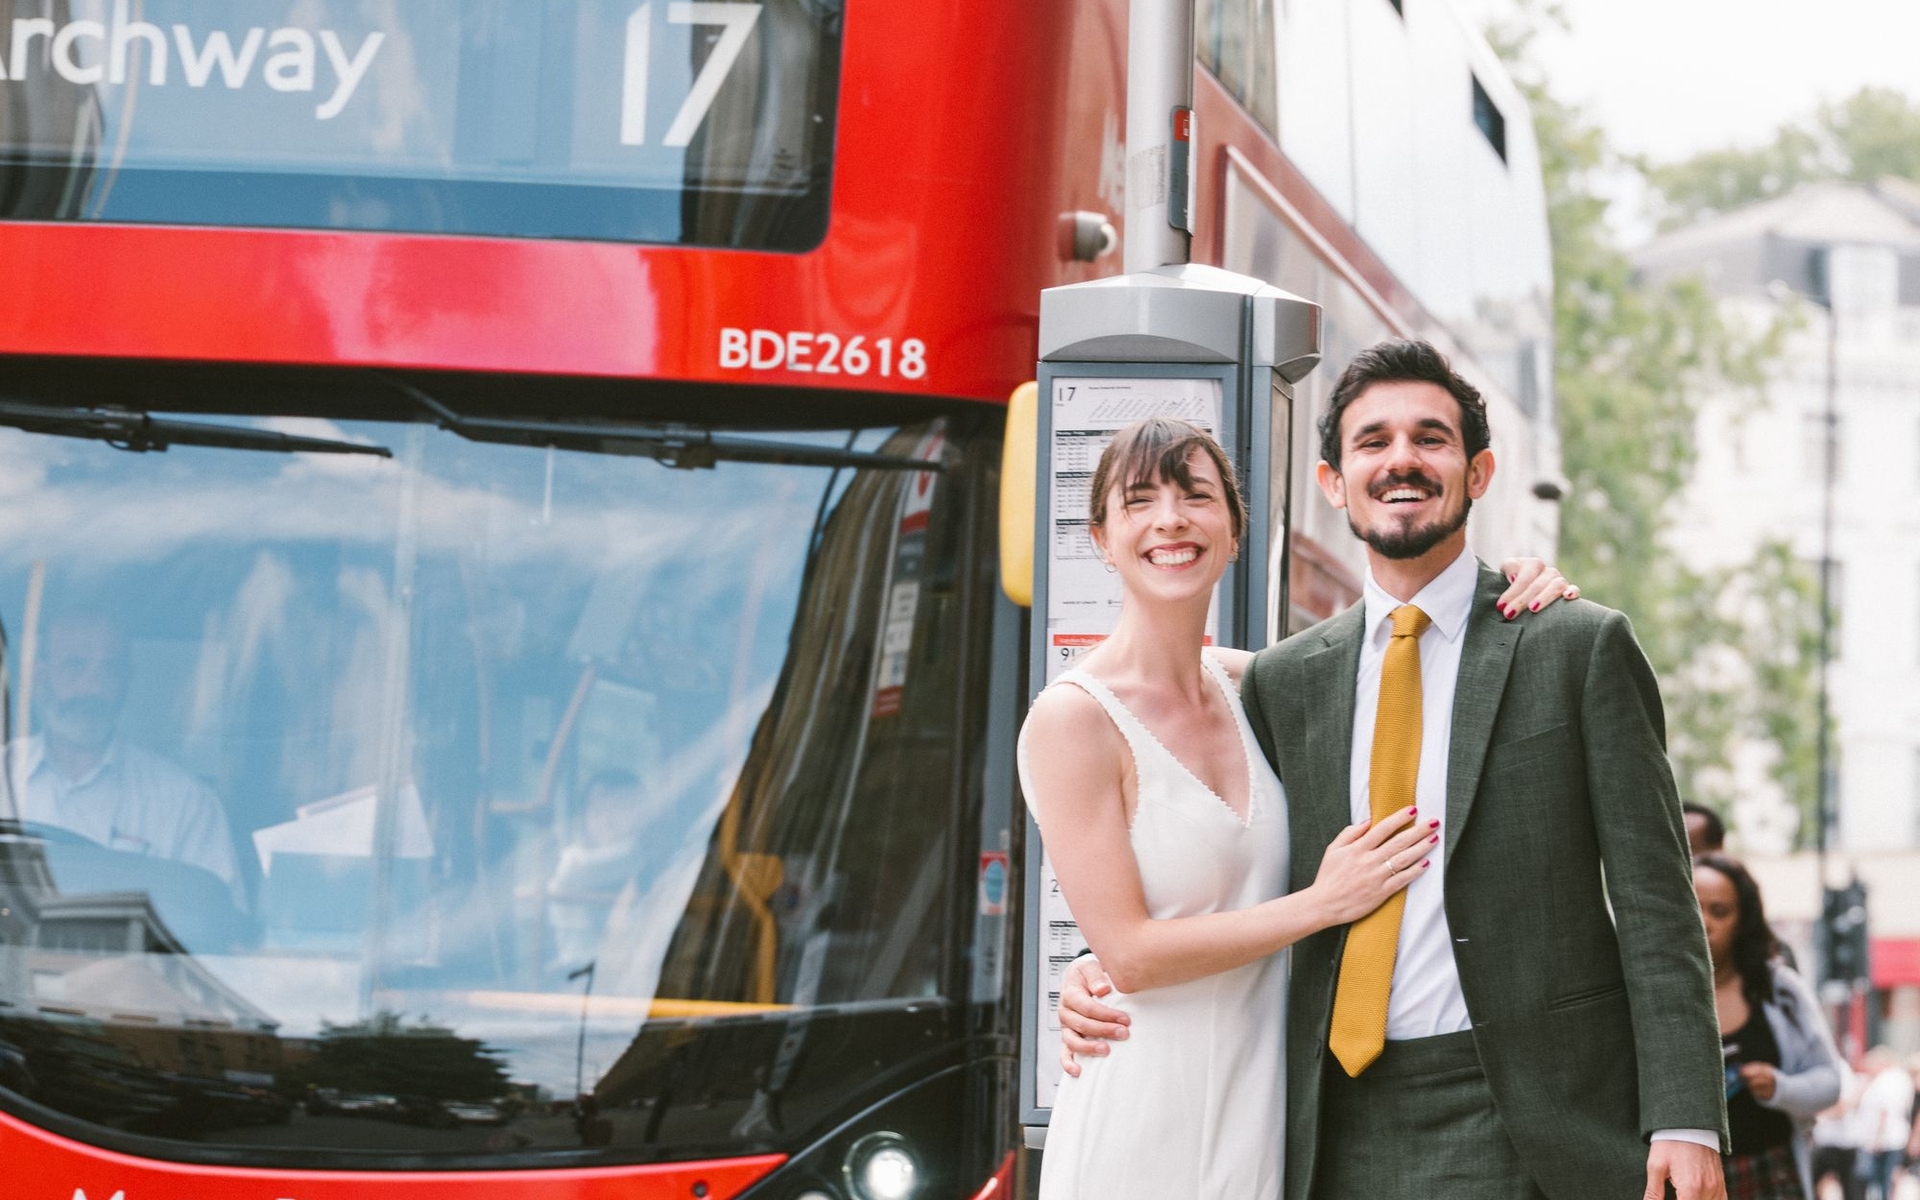 Is this the most romantic bus in London?